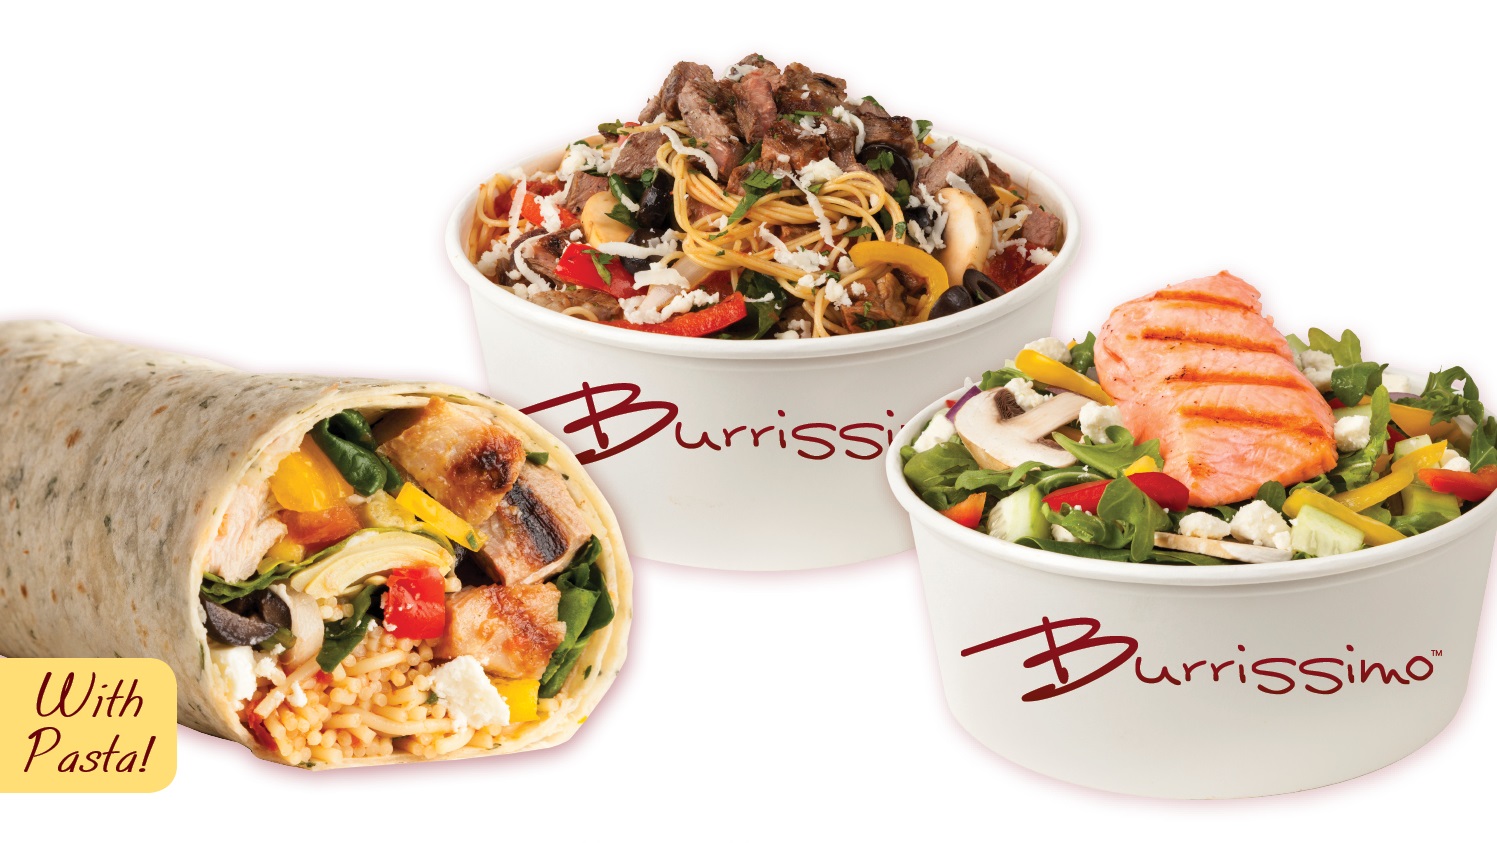 Entrée choices include Burrissimo’s signature Italian burrito, a pasta bowl or salad bowl - and now in Brea - a 10” artisan pizza, with gluten free crust available upon request.